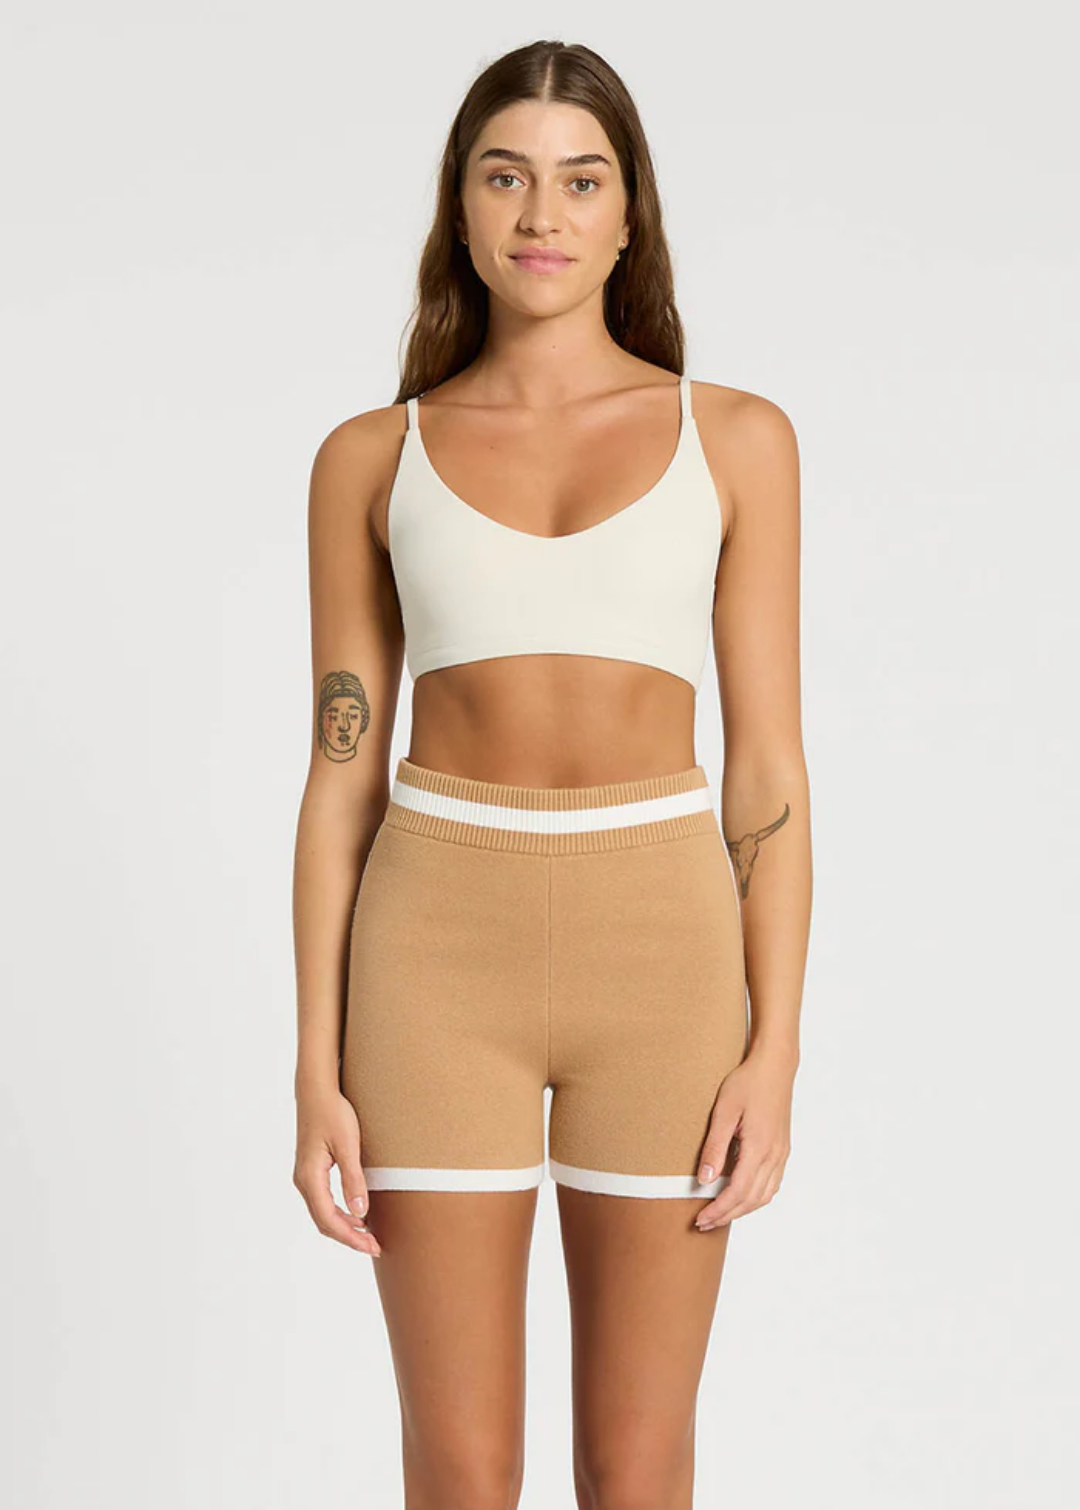 Everyday Knit Short 10cm - Cappuccino Activewear by Nimble - Prae Wellness